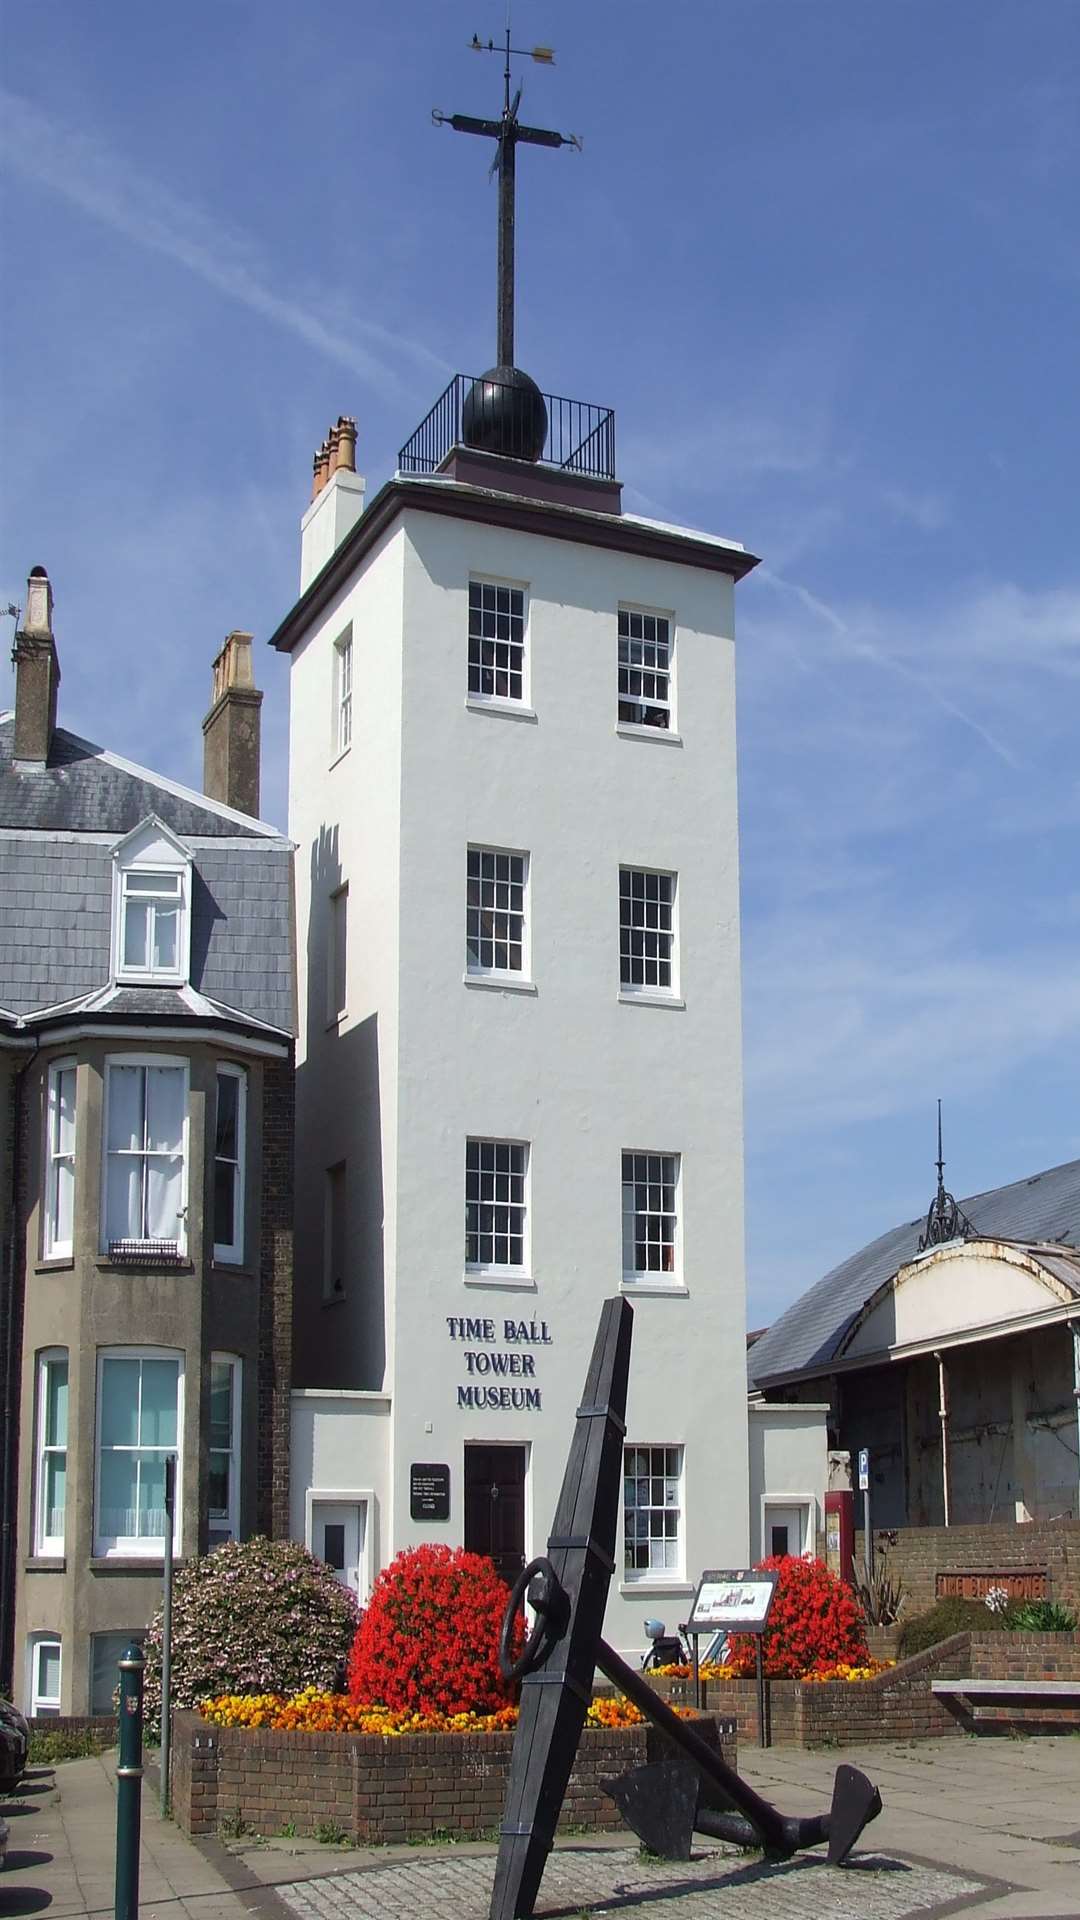 The chronometer will eventually return to the Timeball Tower Museum, pictured.